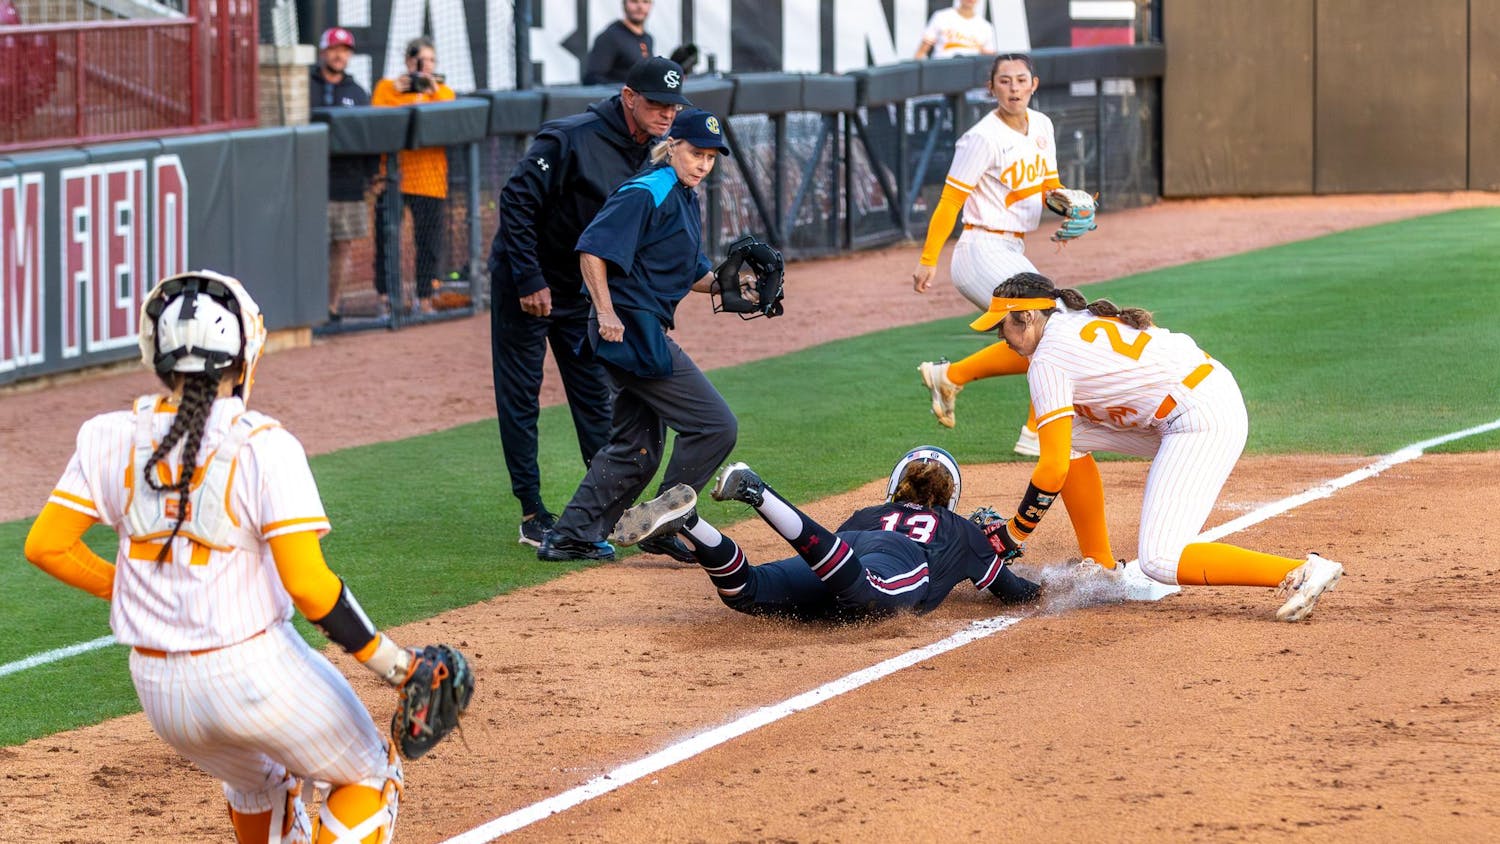 Senior infielder Zoe Laneaux (center) gets tagged out during a pickle between third and home base in the fourth inning of the match against the University of Tennessee at Beckham Field on March 24, 2024. The Volunteers beat the Gamecocks 7-0.